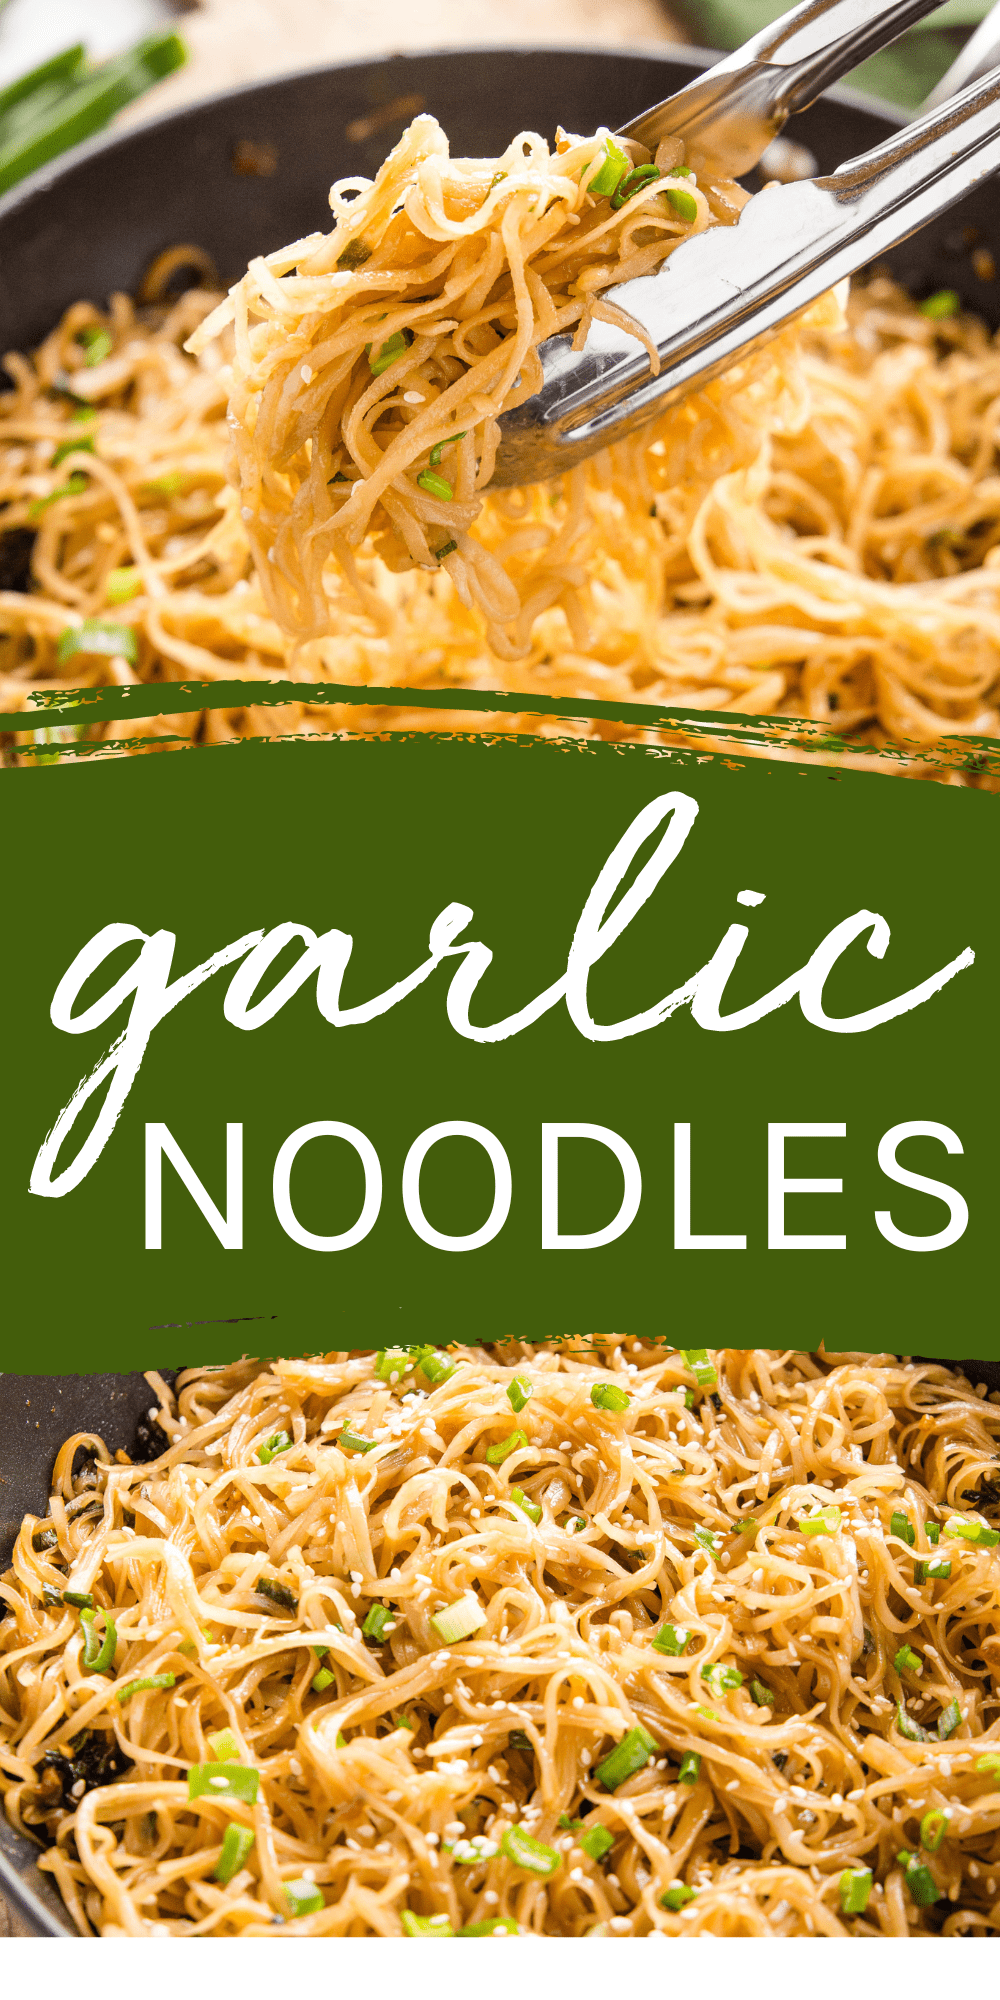 This Garlic Noodles Recipe is the perfect easy dish to make with stir fry veggies or meat. Made with a few basic pantry ingredients and ready in 10 minutes or less! Recipe from thebusybaker.ca! #garlicnoodles #asiannoodles #stirfry #easymeal #easydinner #sidedish #takeout via @busybakerblog